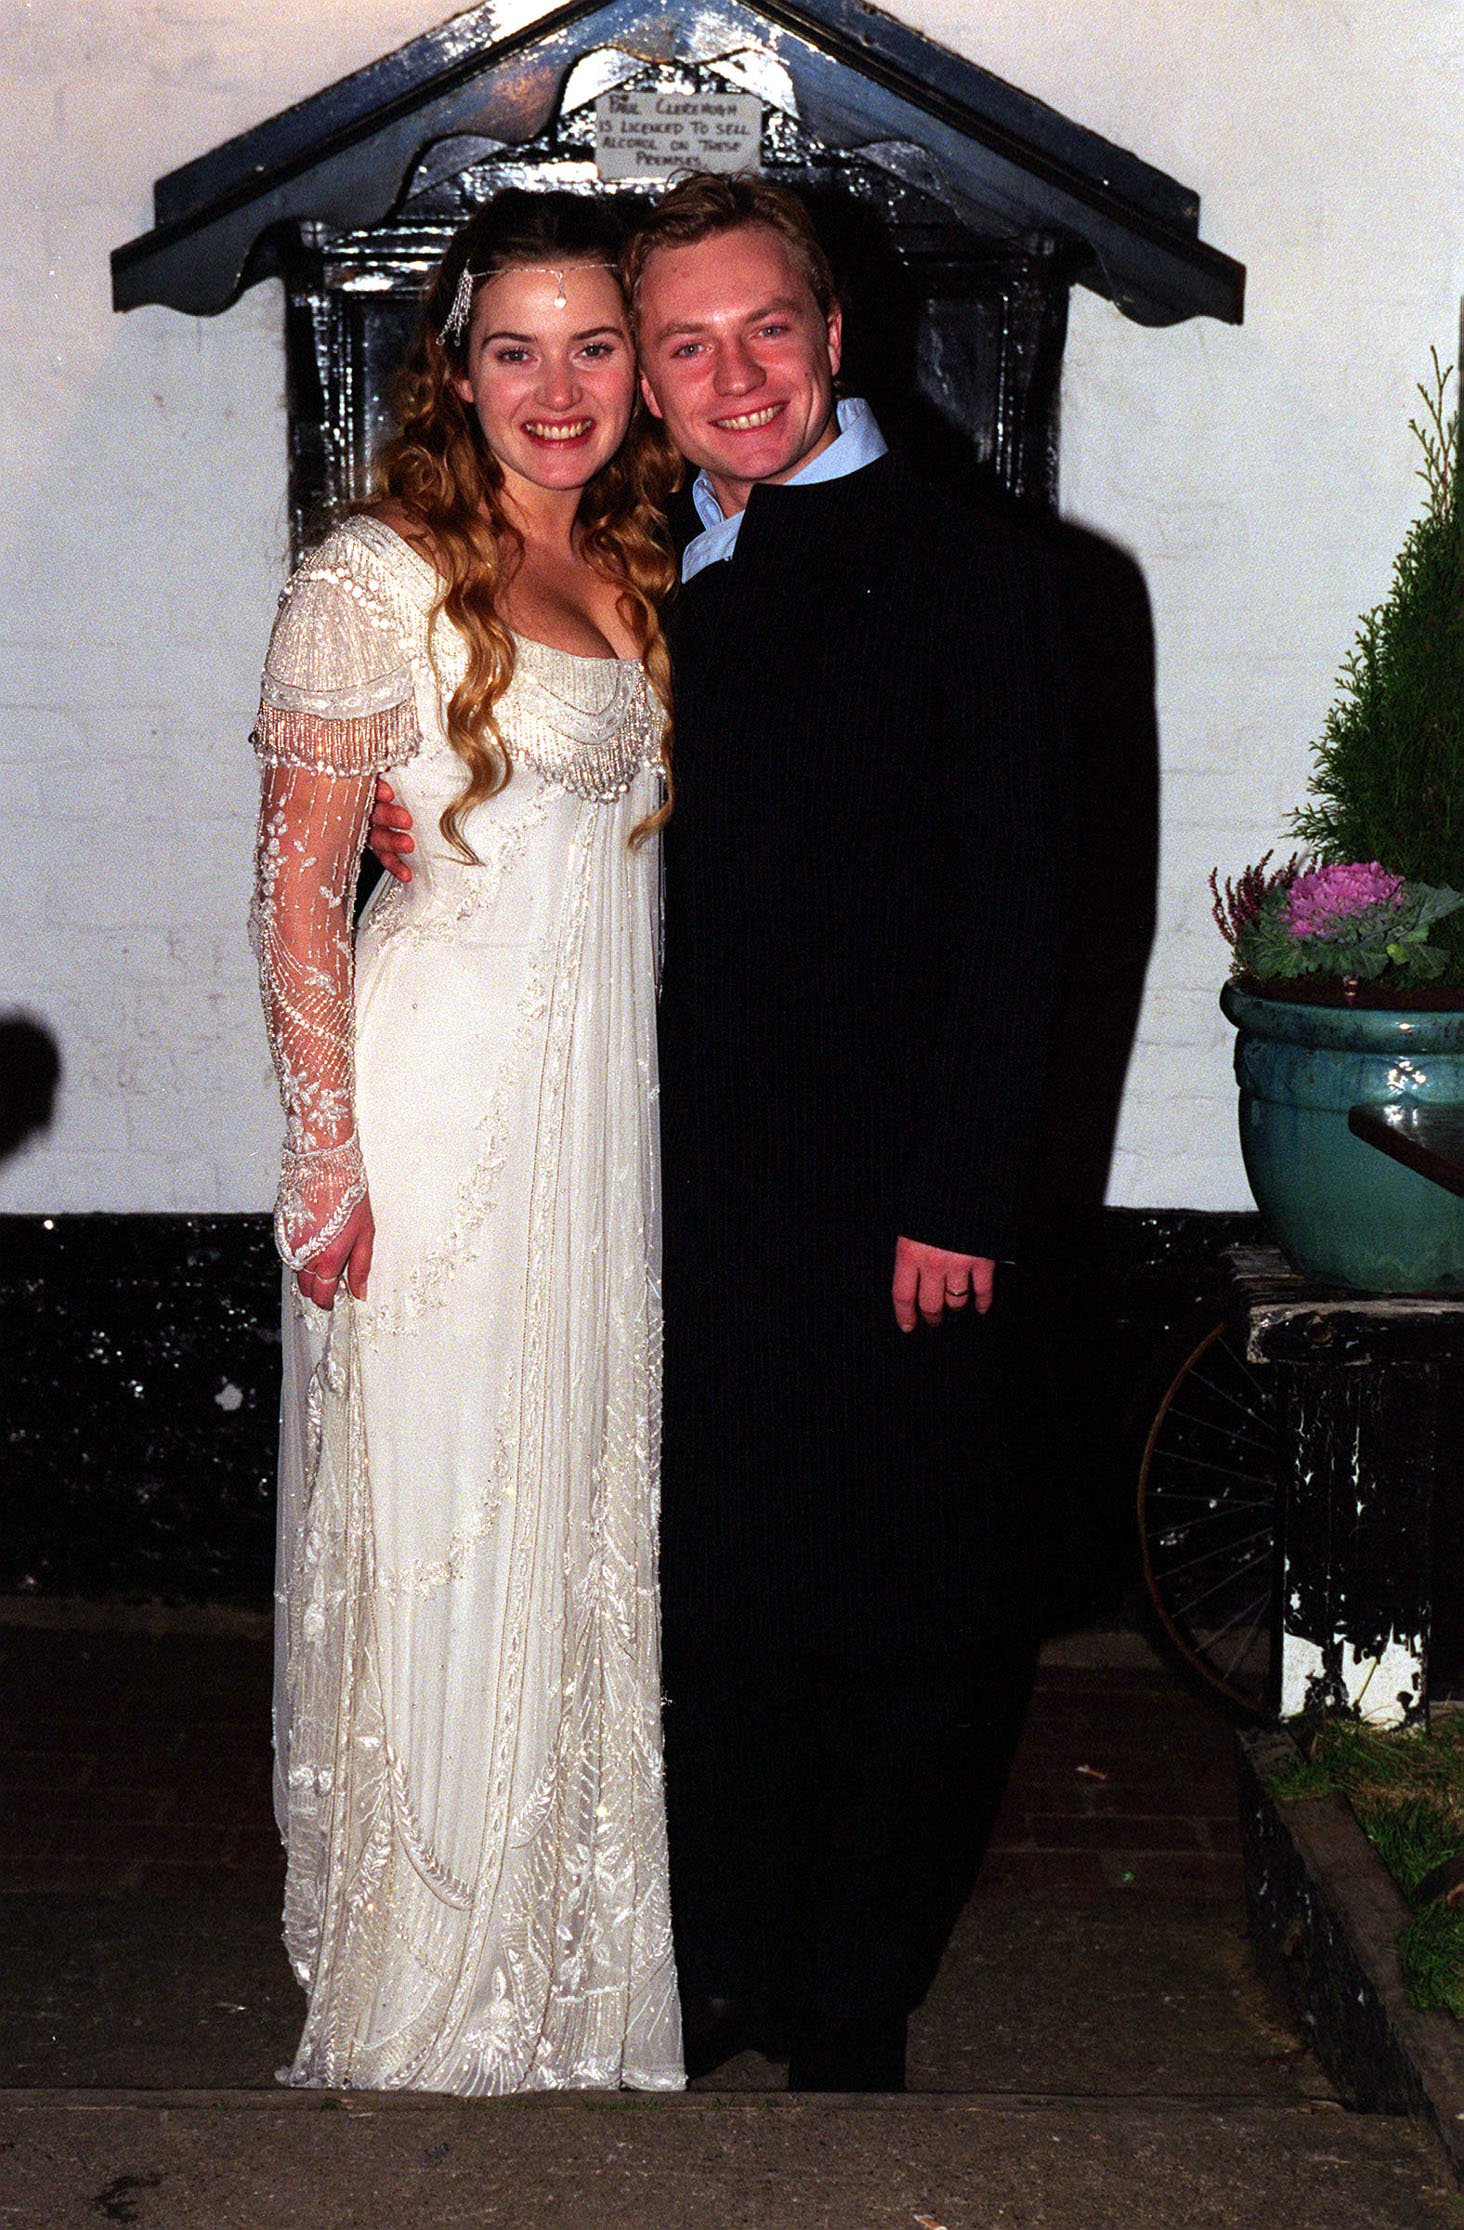 Actress Kate Winslet and husband Jim Threapleton at their wedding reception on November 22, 1998 at the Crooked Billet Pub in Stoke Row in Oxfordshire, England  | Source: Getty Images